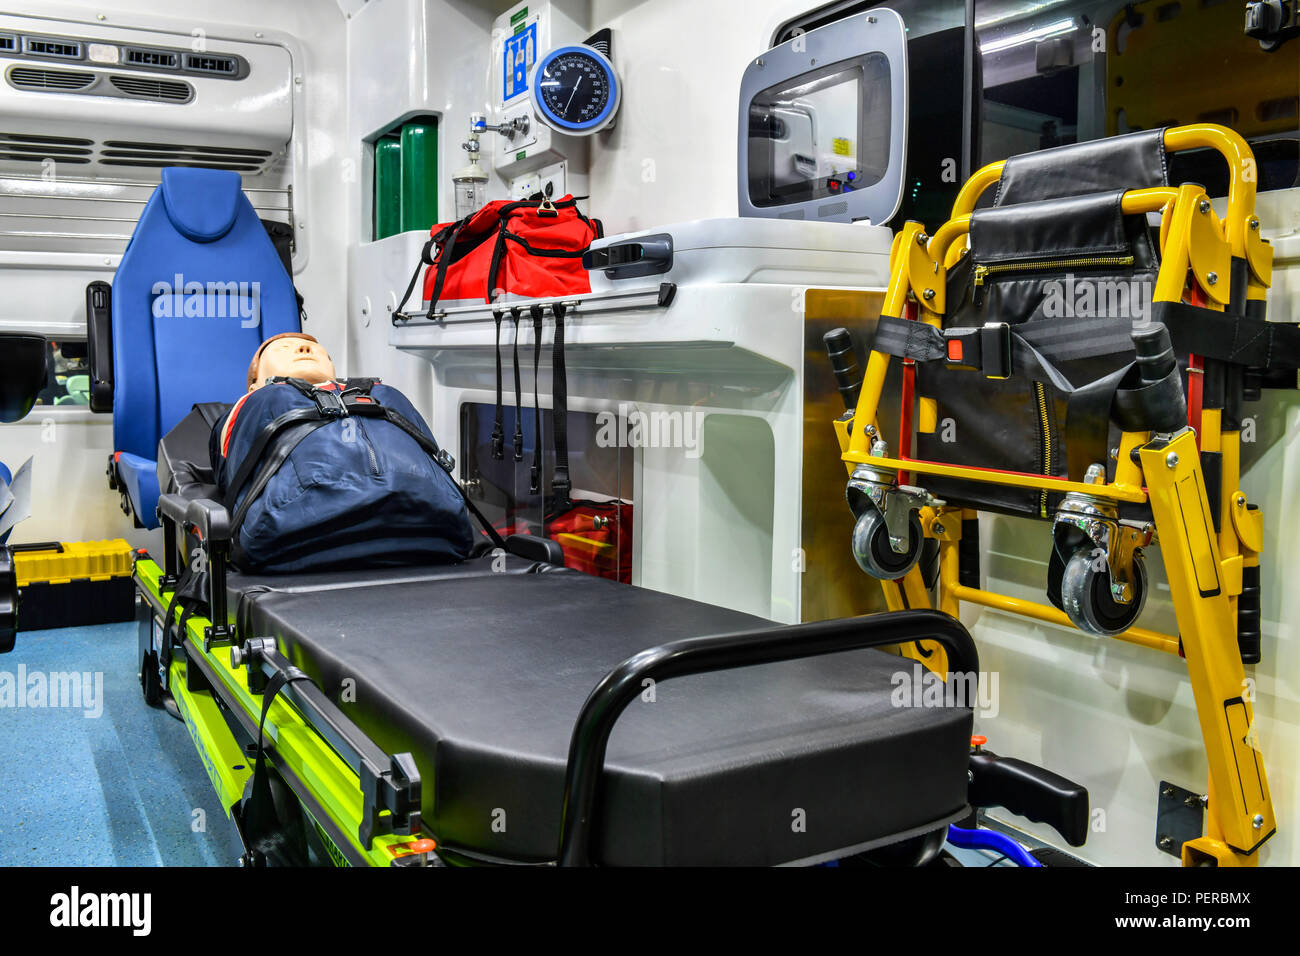 Emergency equipment and devices, Ambulance interior details. Stock Photo